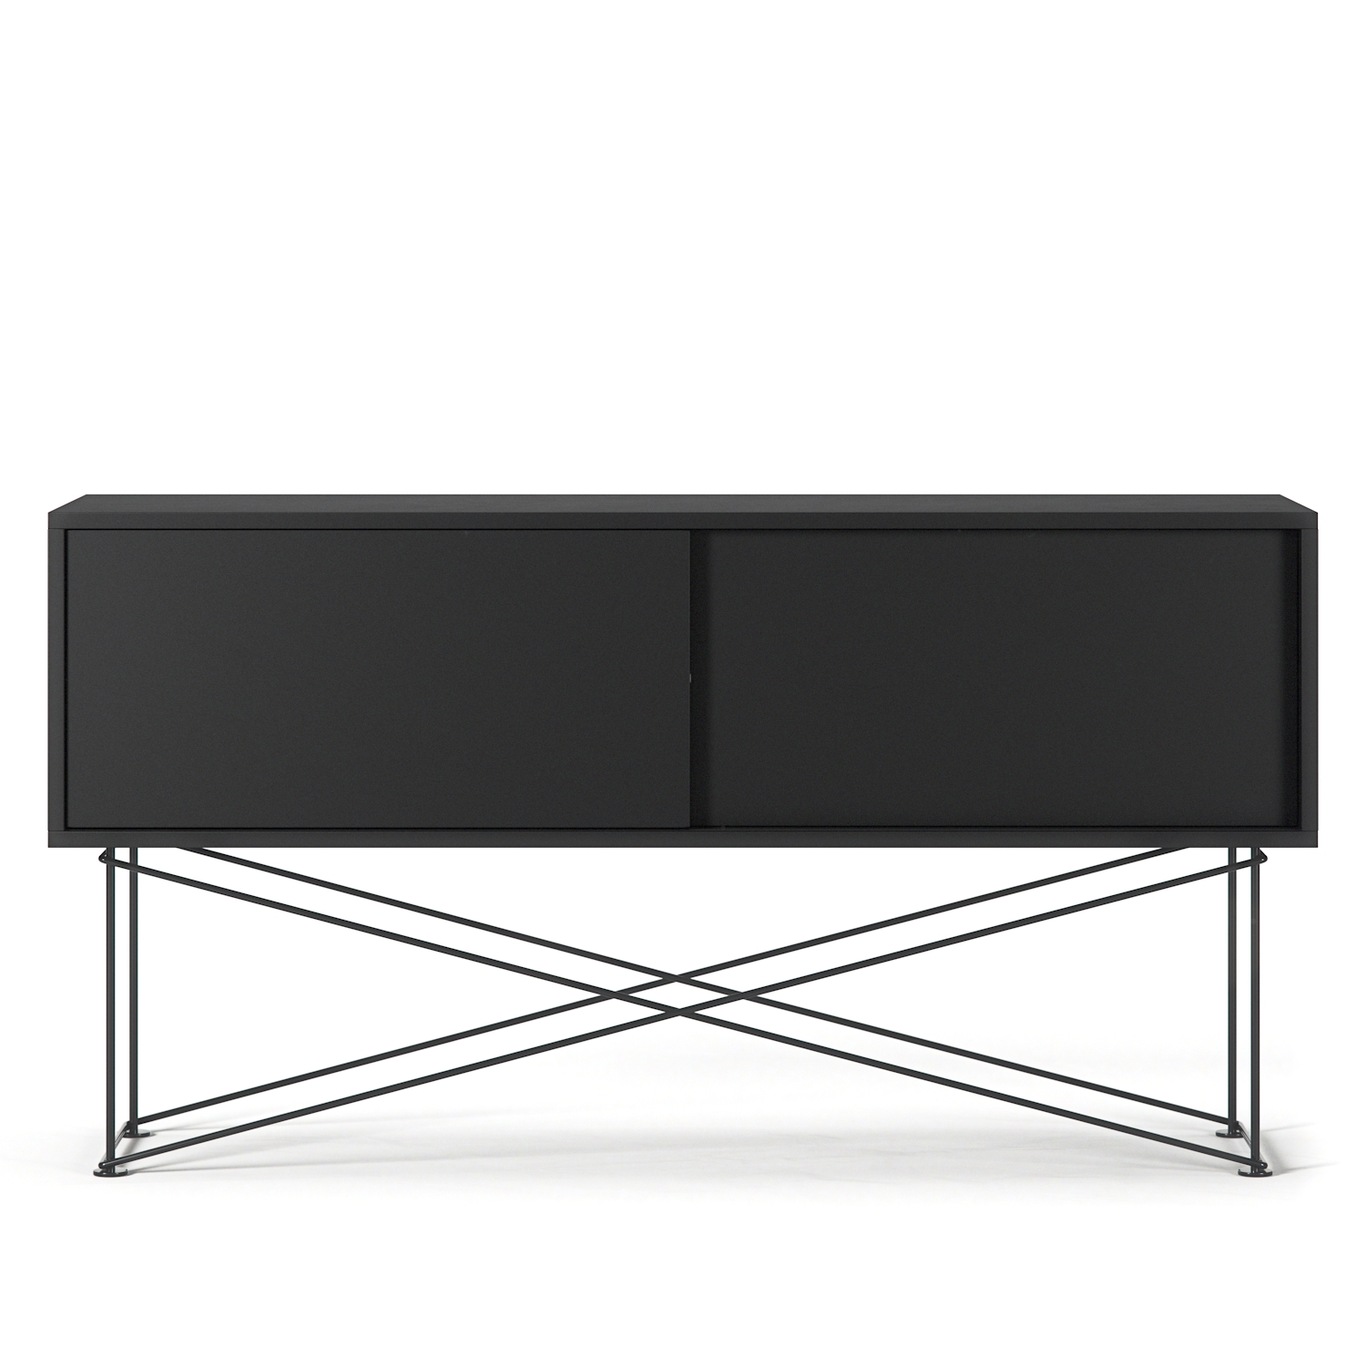 Vogue Media Bench With Stand 136 cm, Anthracite / Black